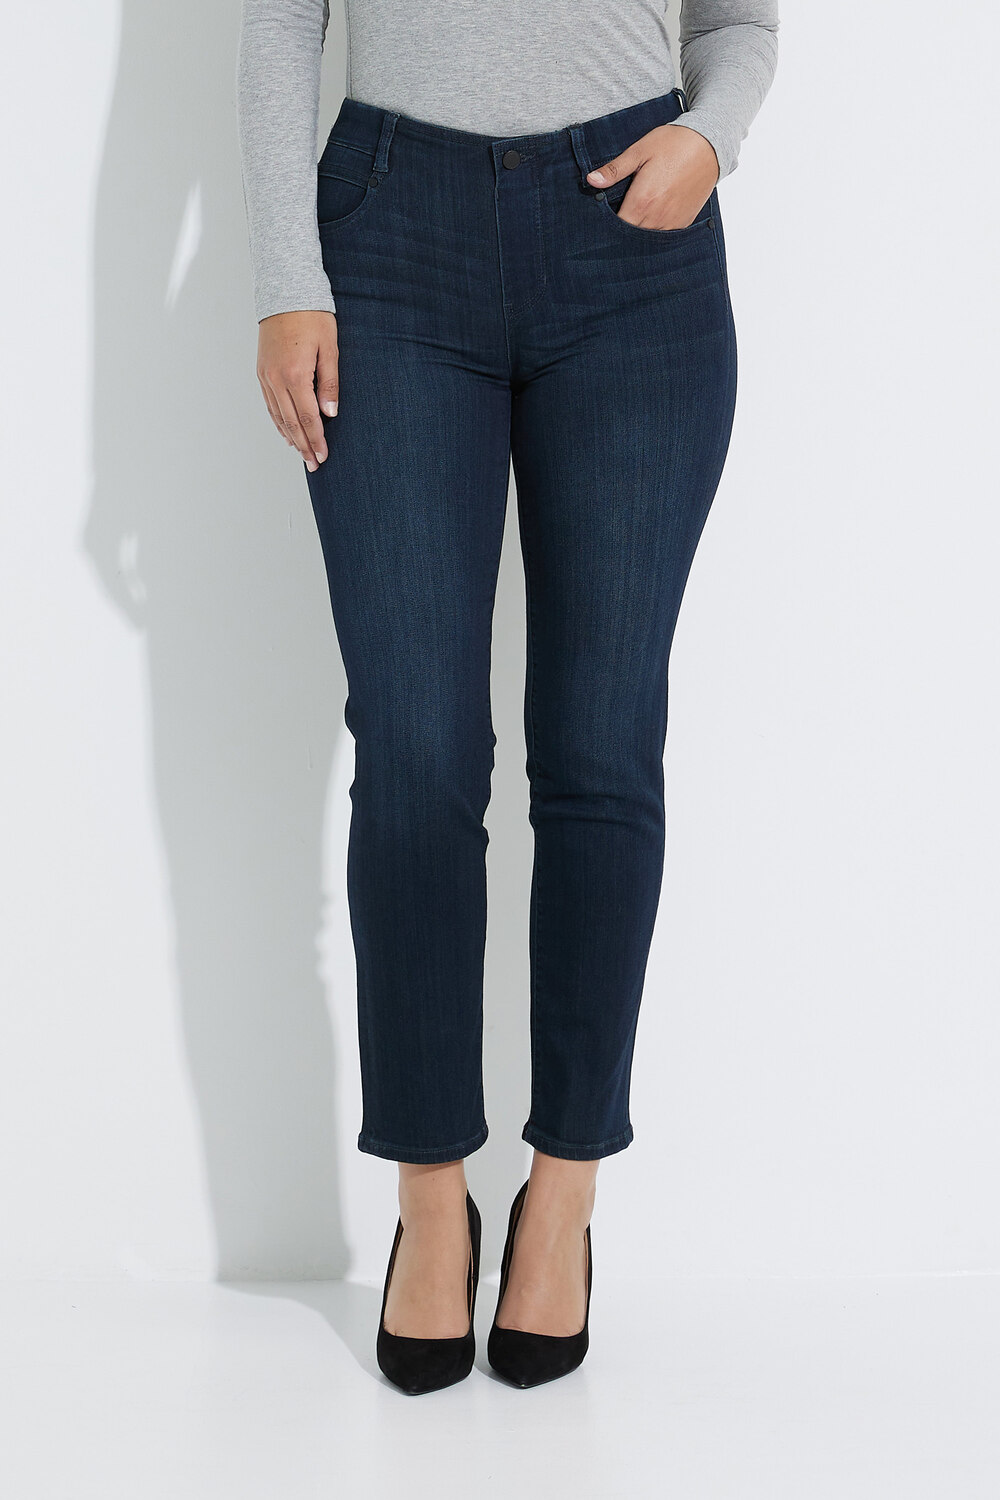 Pull-On Slim High Performance Jeans Style LM2401F80. Halifax